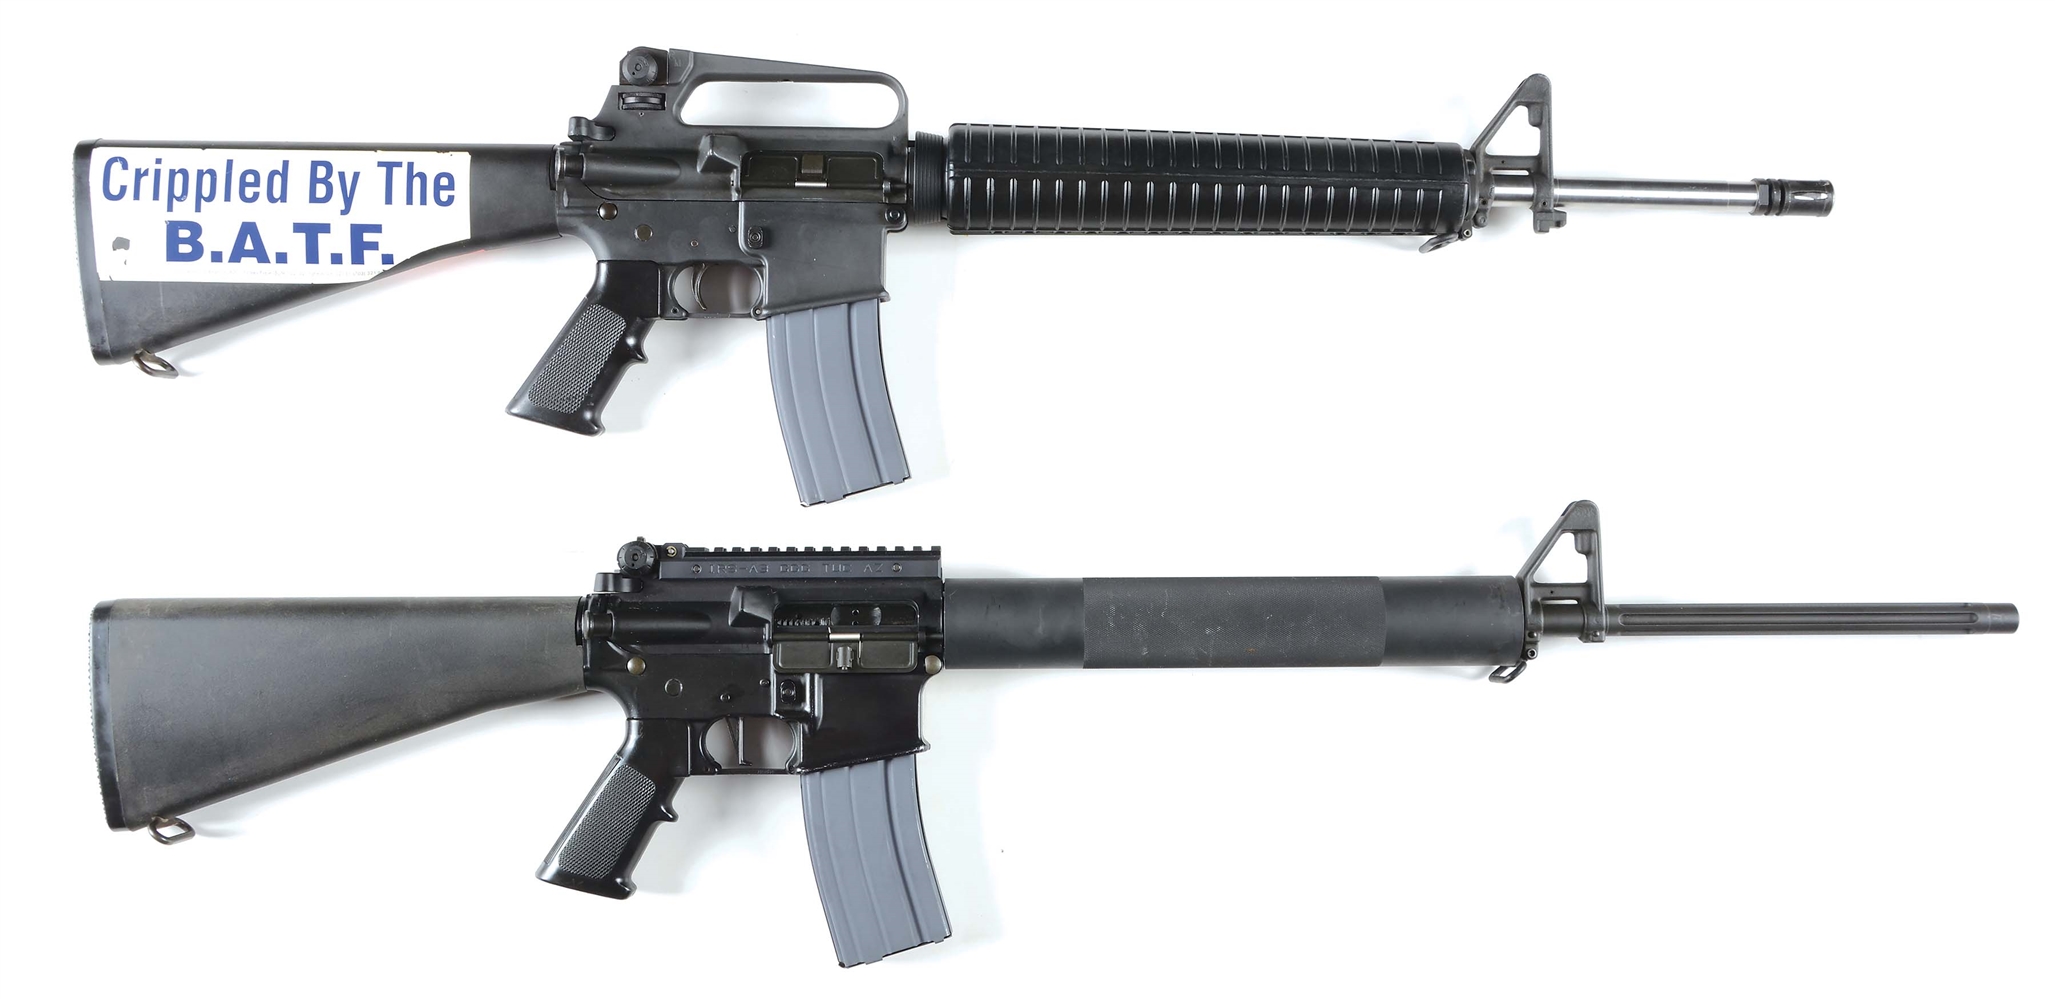 (M) LOT OF 2: COLT AR-15 SEMI-AUTOMATIC RIFLE AND SGW AR-15 SEMI-AUTOMATIC RIFLE.